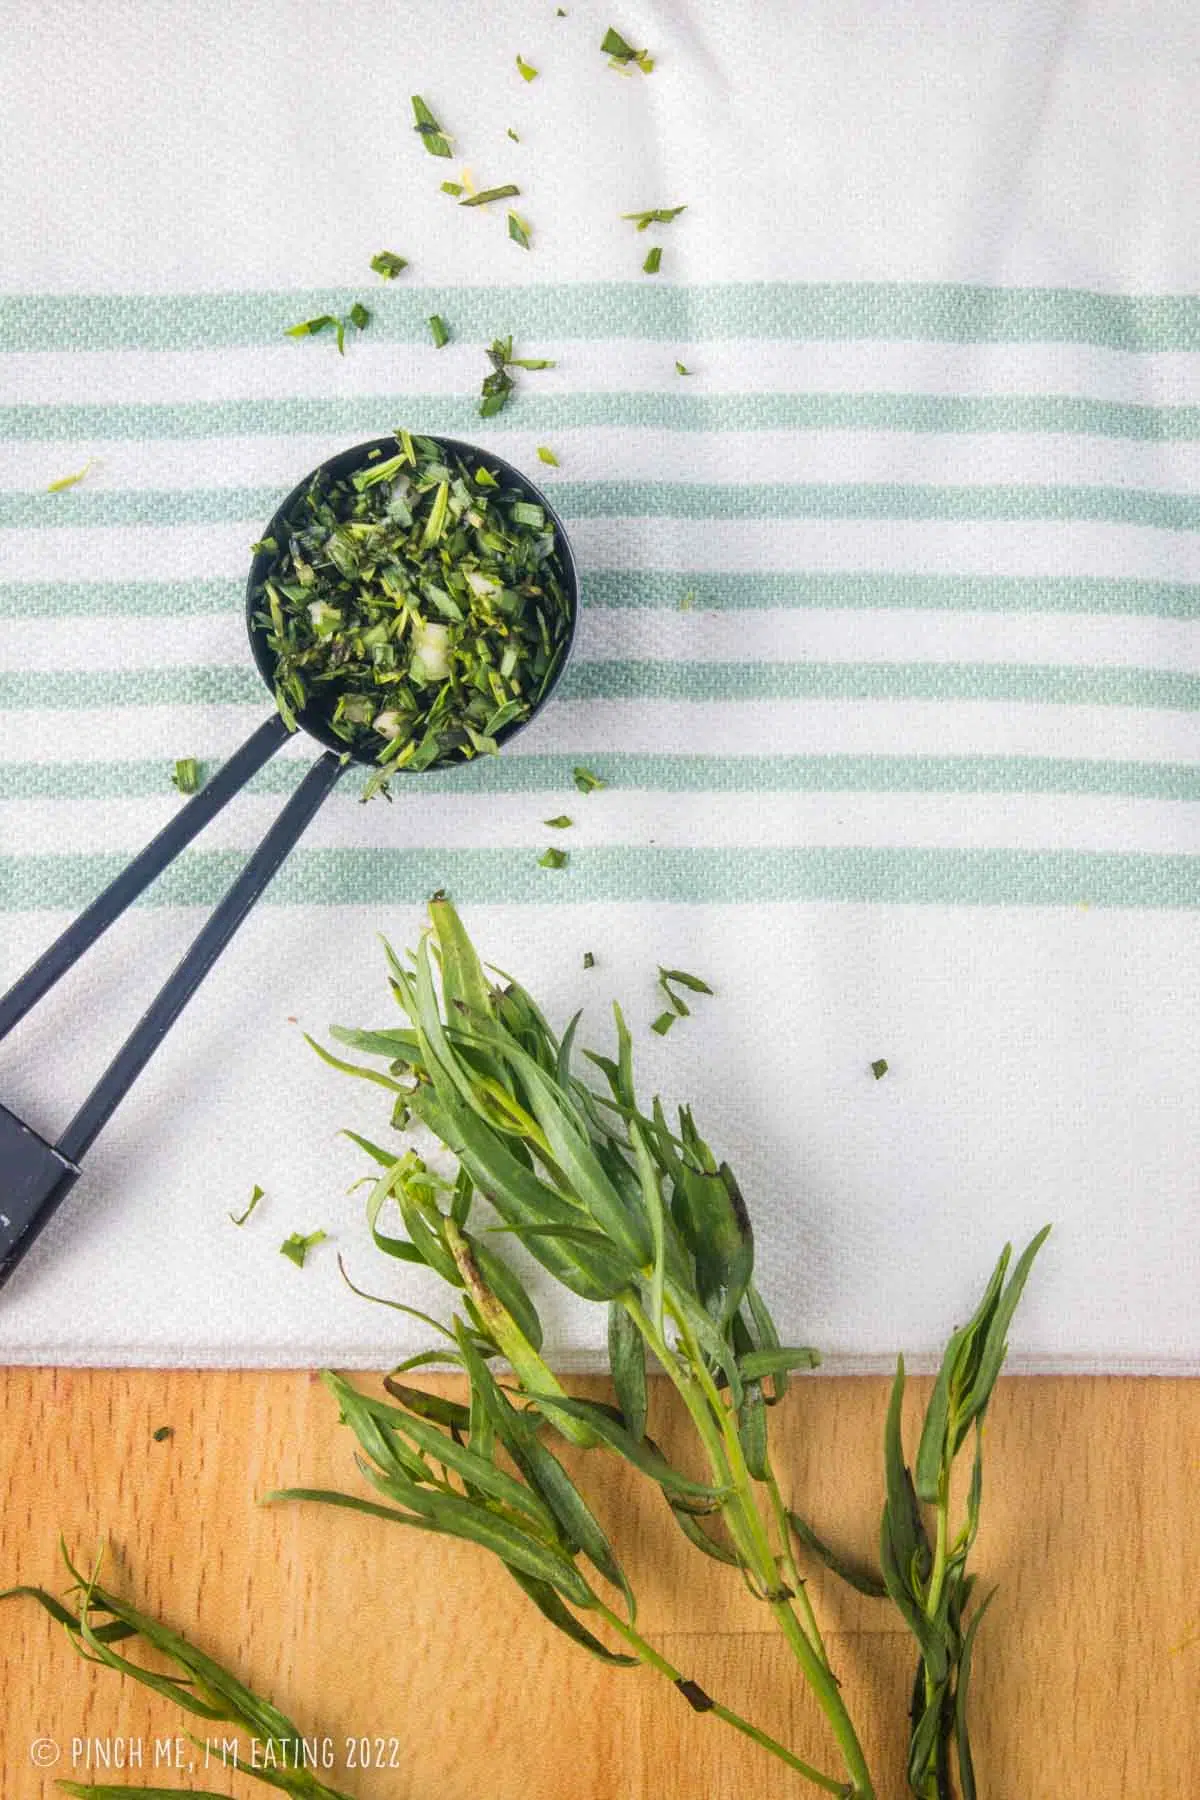 Chopped fresh tarragon in a measuring spoon on a kitchen towel on butcher block counter next to a stem of fresh tarragon leaves.